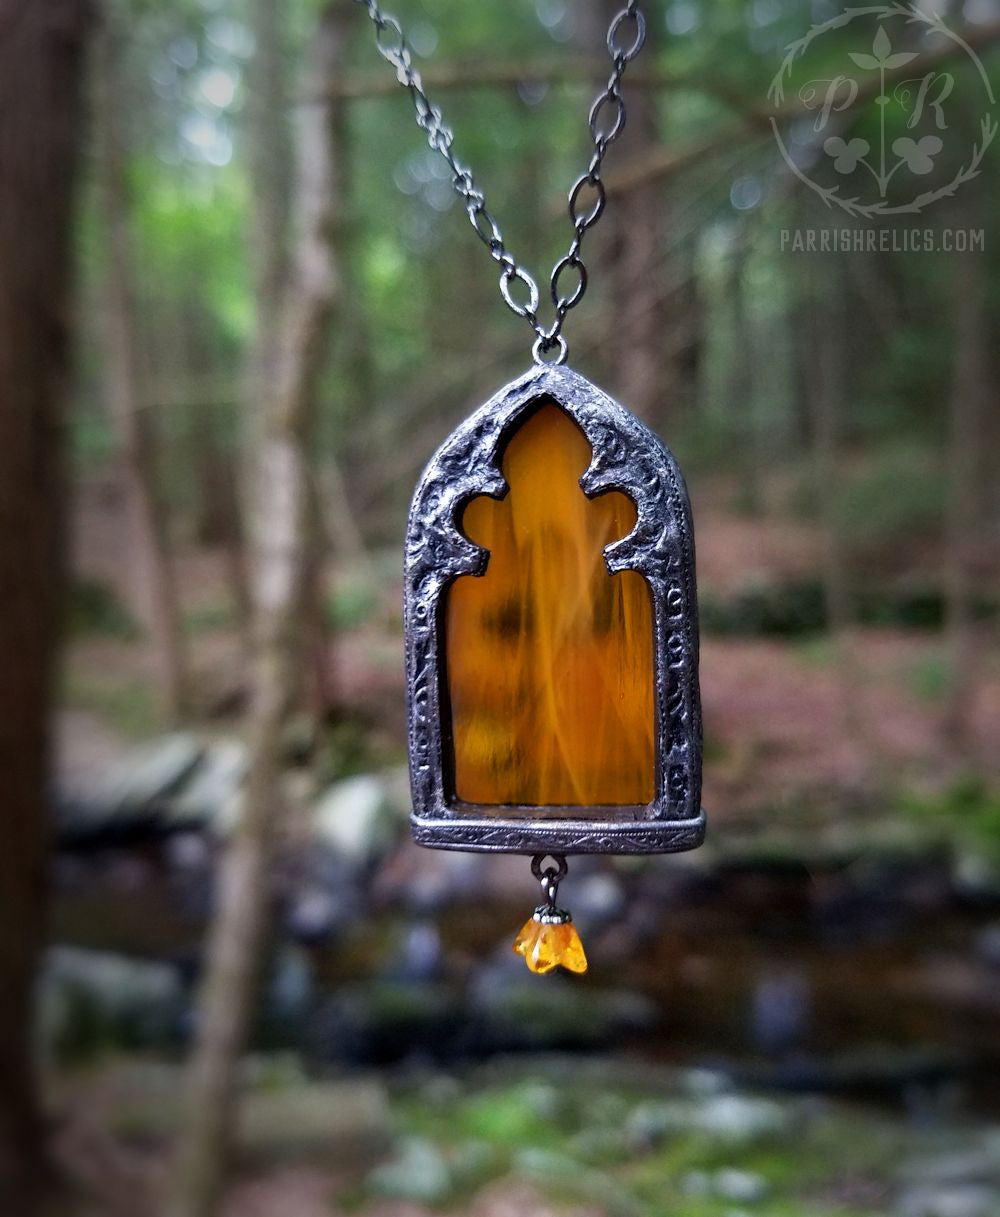 Hestia's Golden Fire ~ Stained Glass Window Amulet